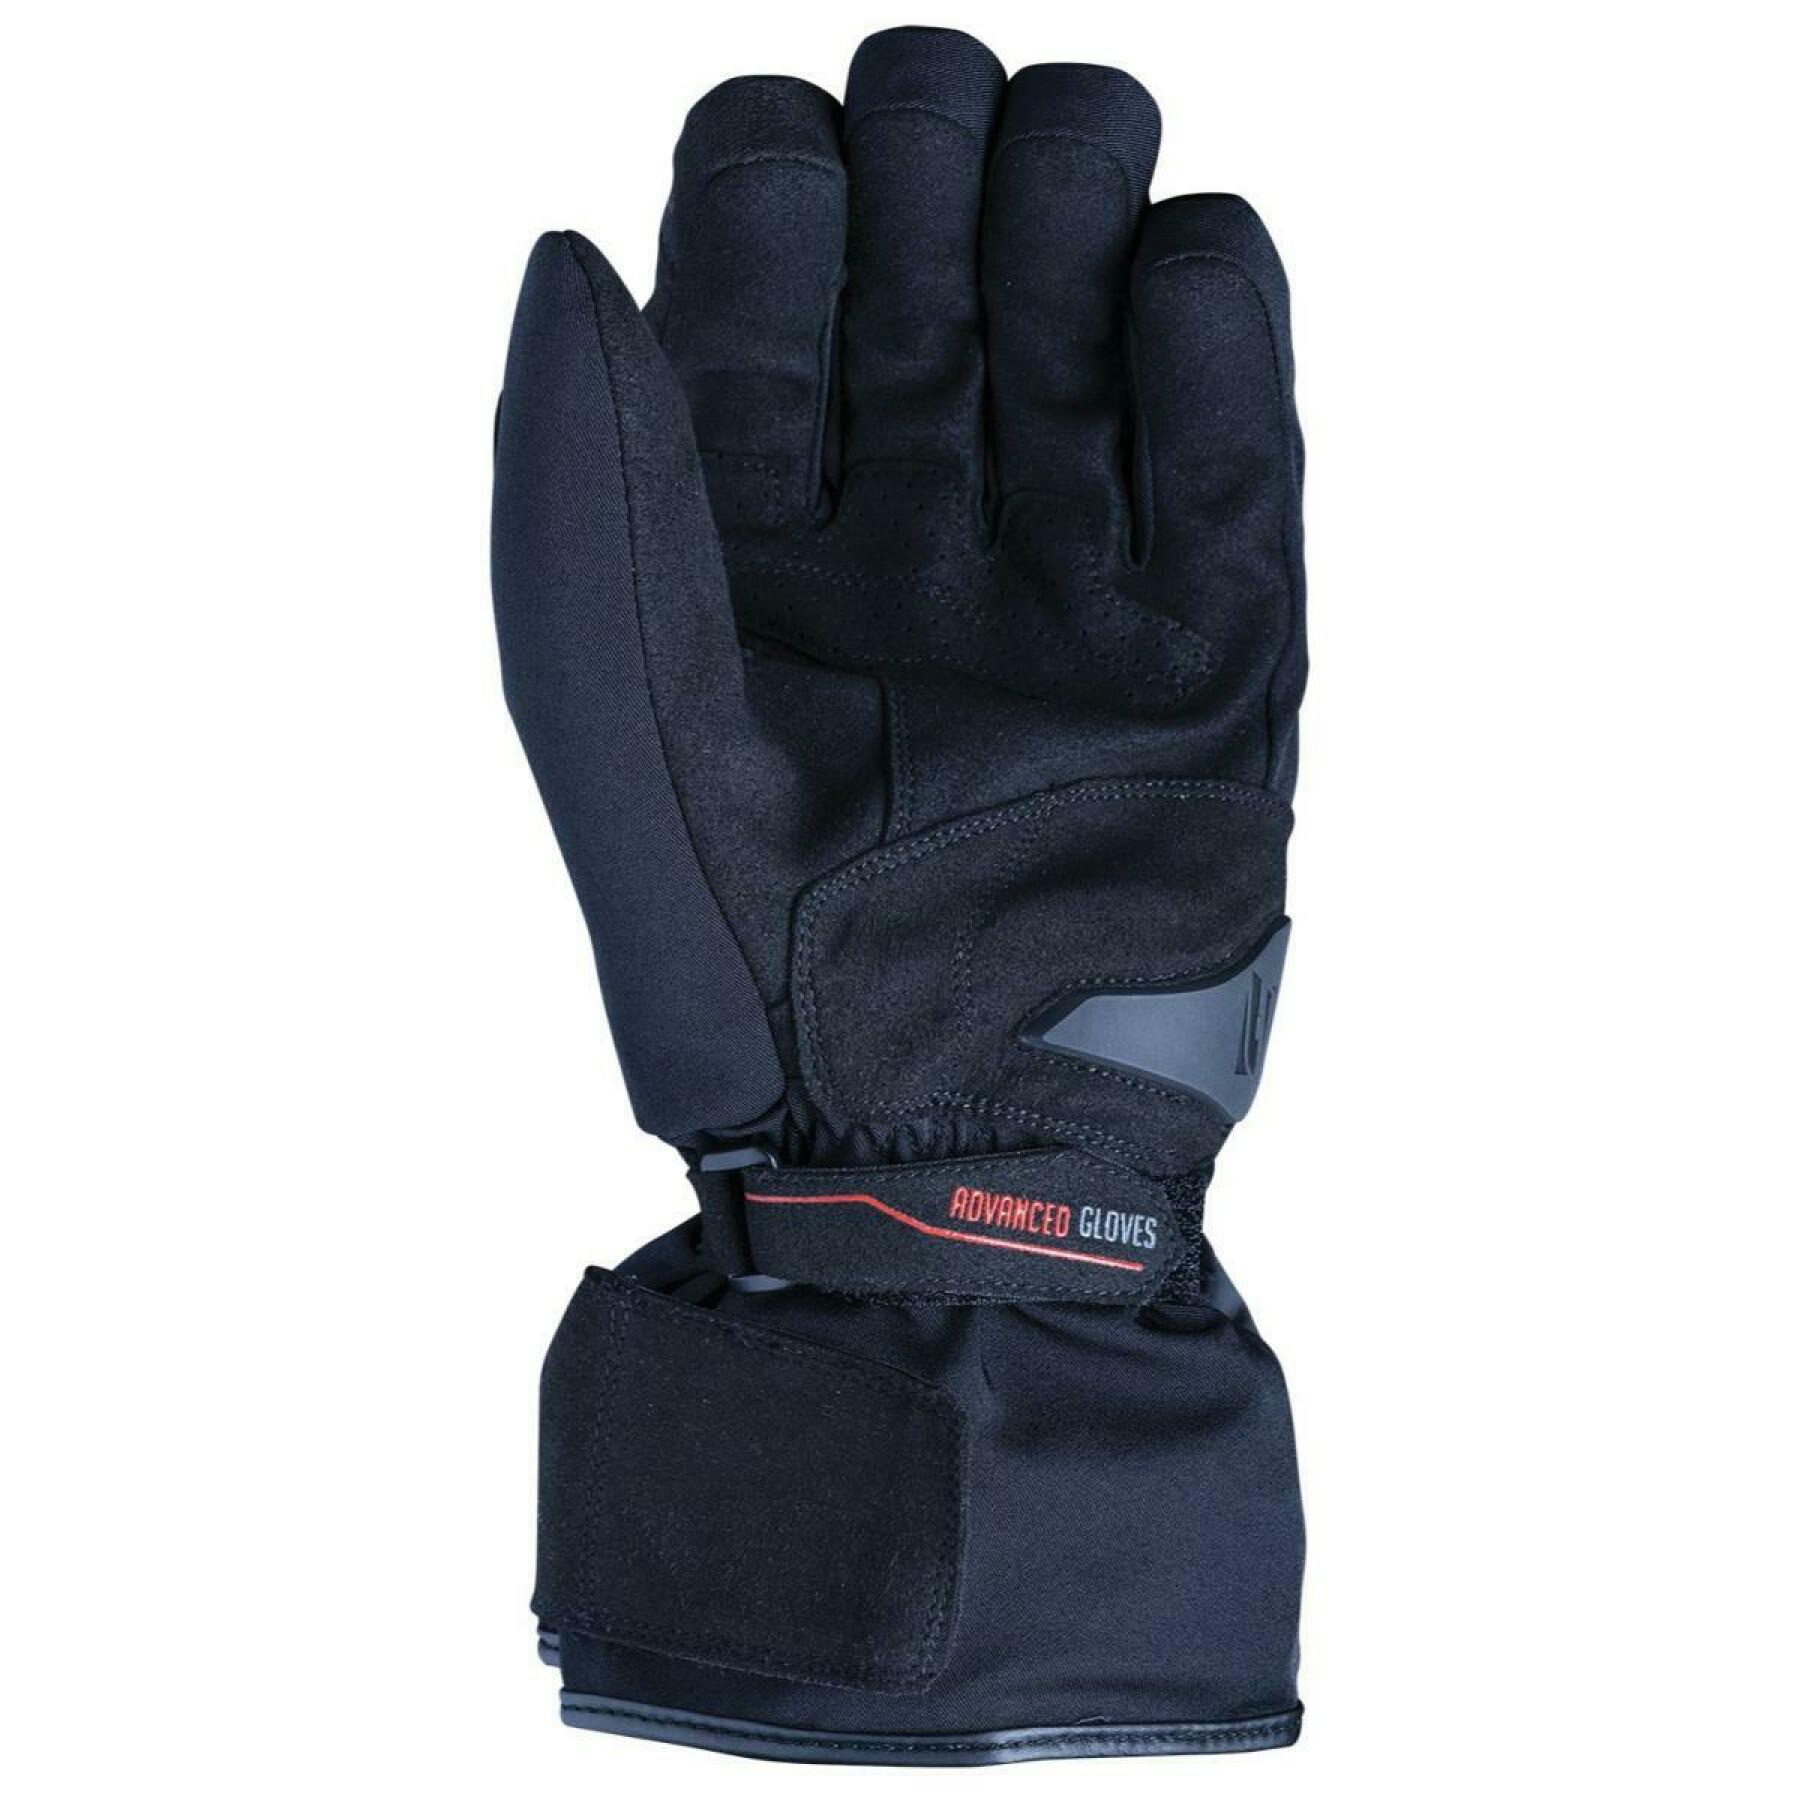 Winter motorcycle gloves Five hg3.20 wp